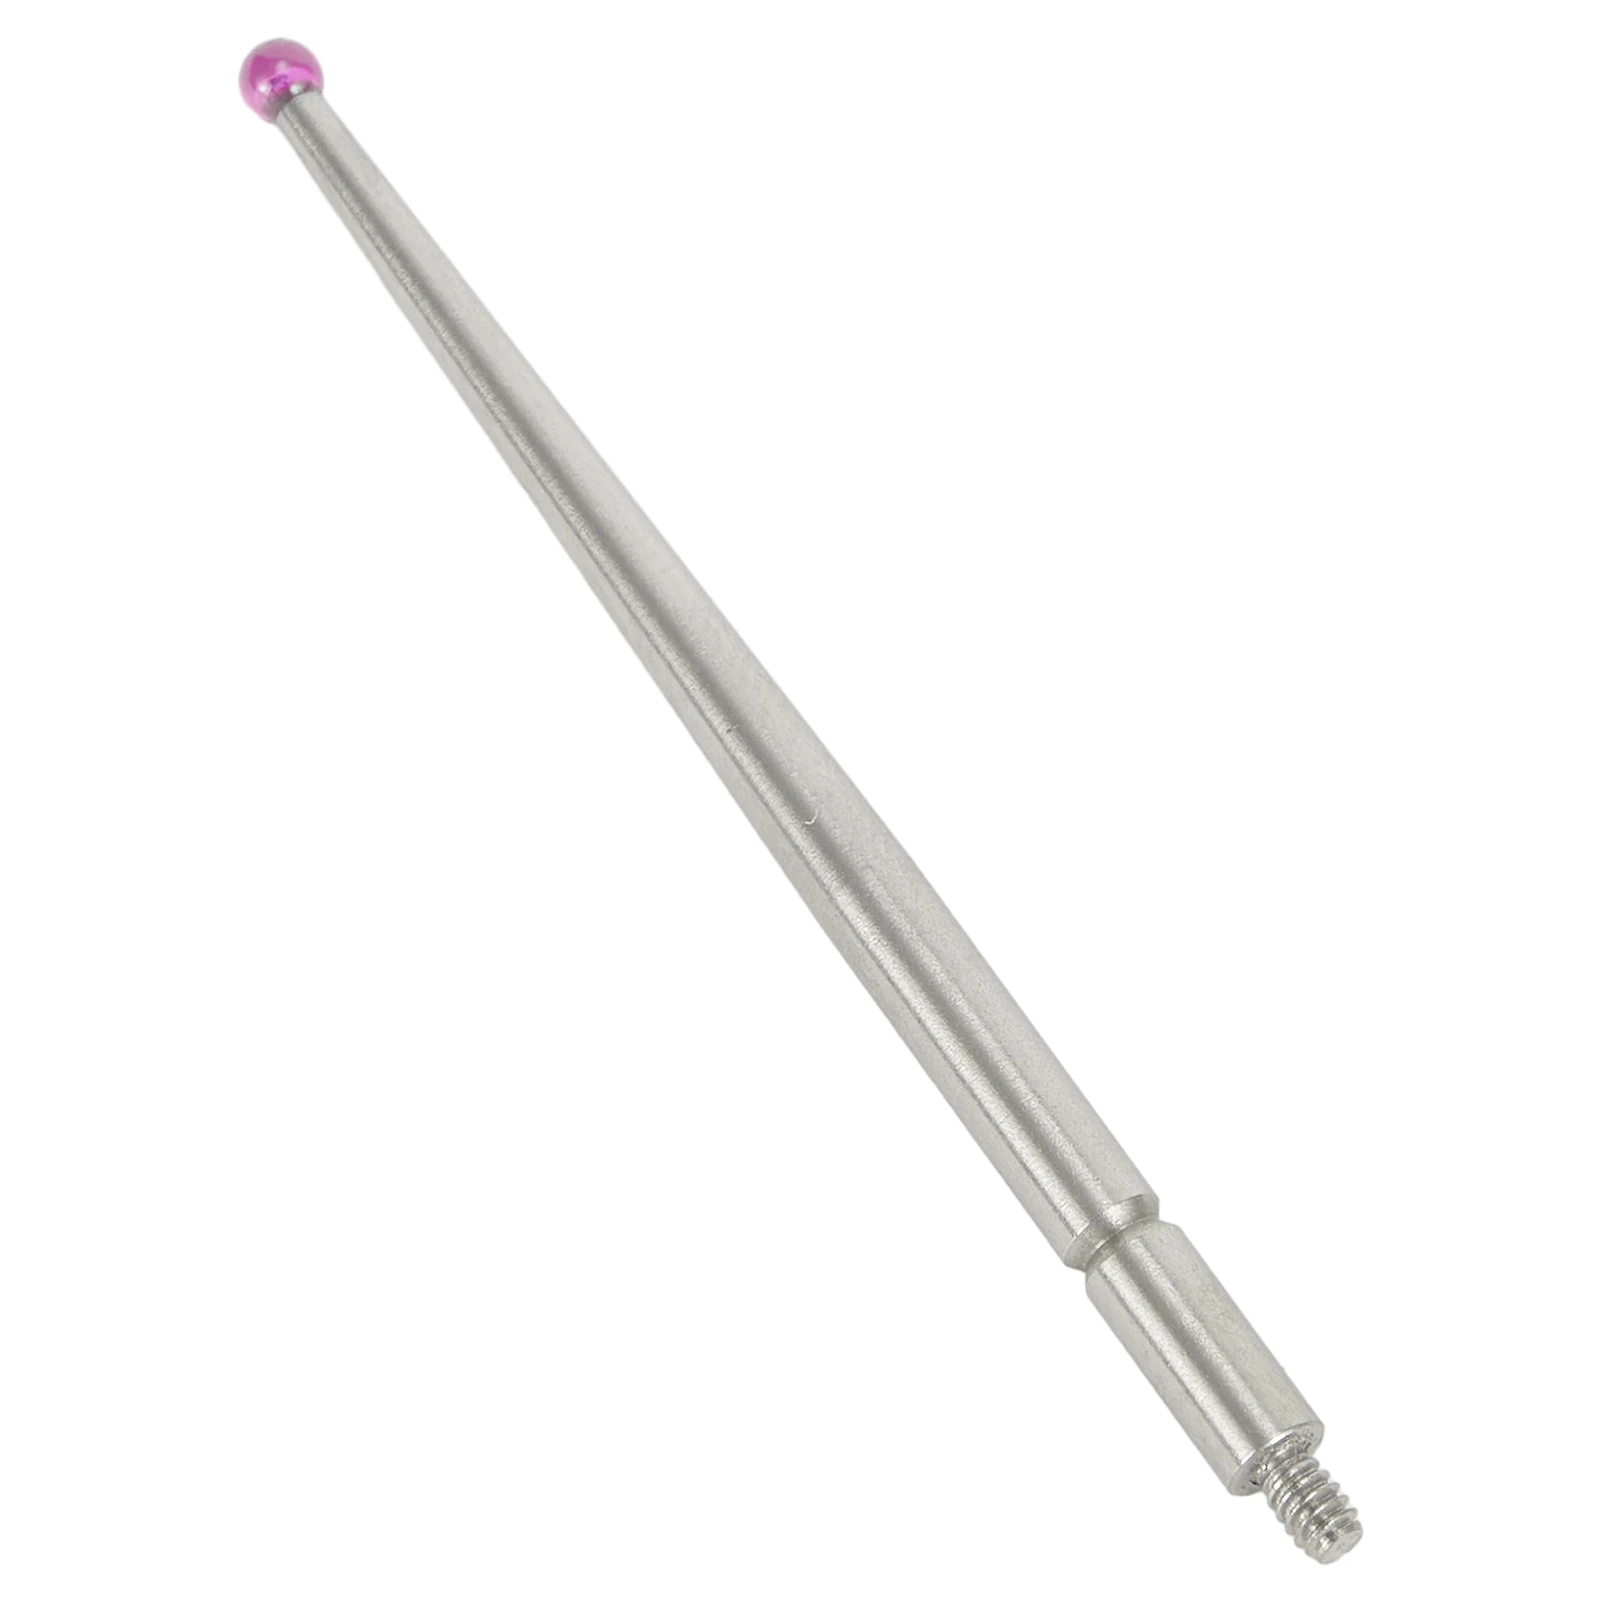 Contact Points Probe For Dial Test Indicator M1.6 Threaded Shank 2mm Diameter Ru By Ball For 513-115 For 513-215F contact points probe for dial test indicator m1 6 threaded shank 21cza211 contacts 44 5mm length for 513 215fe